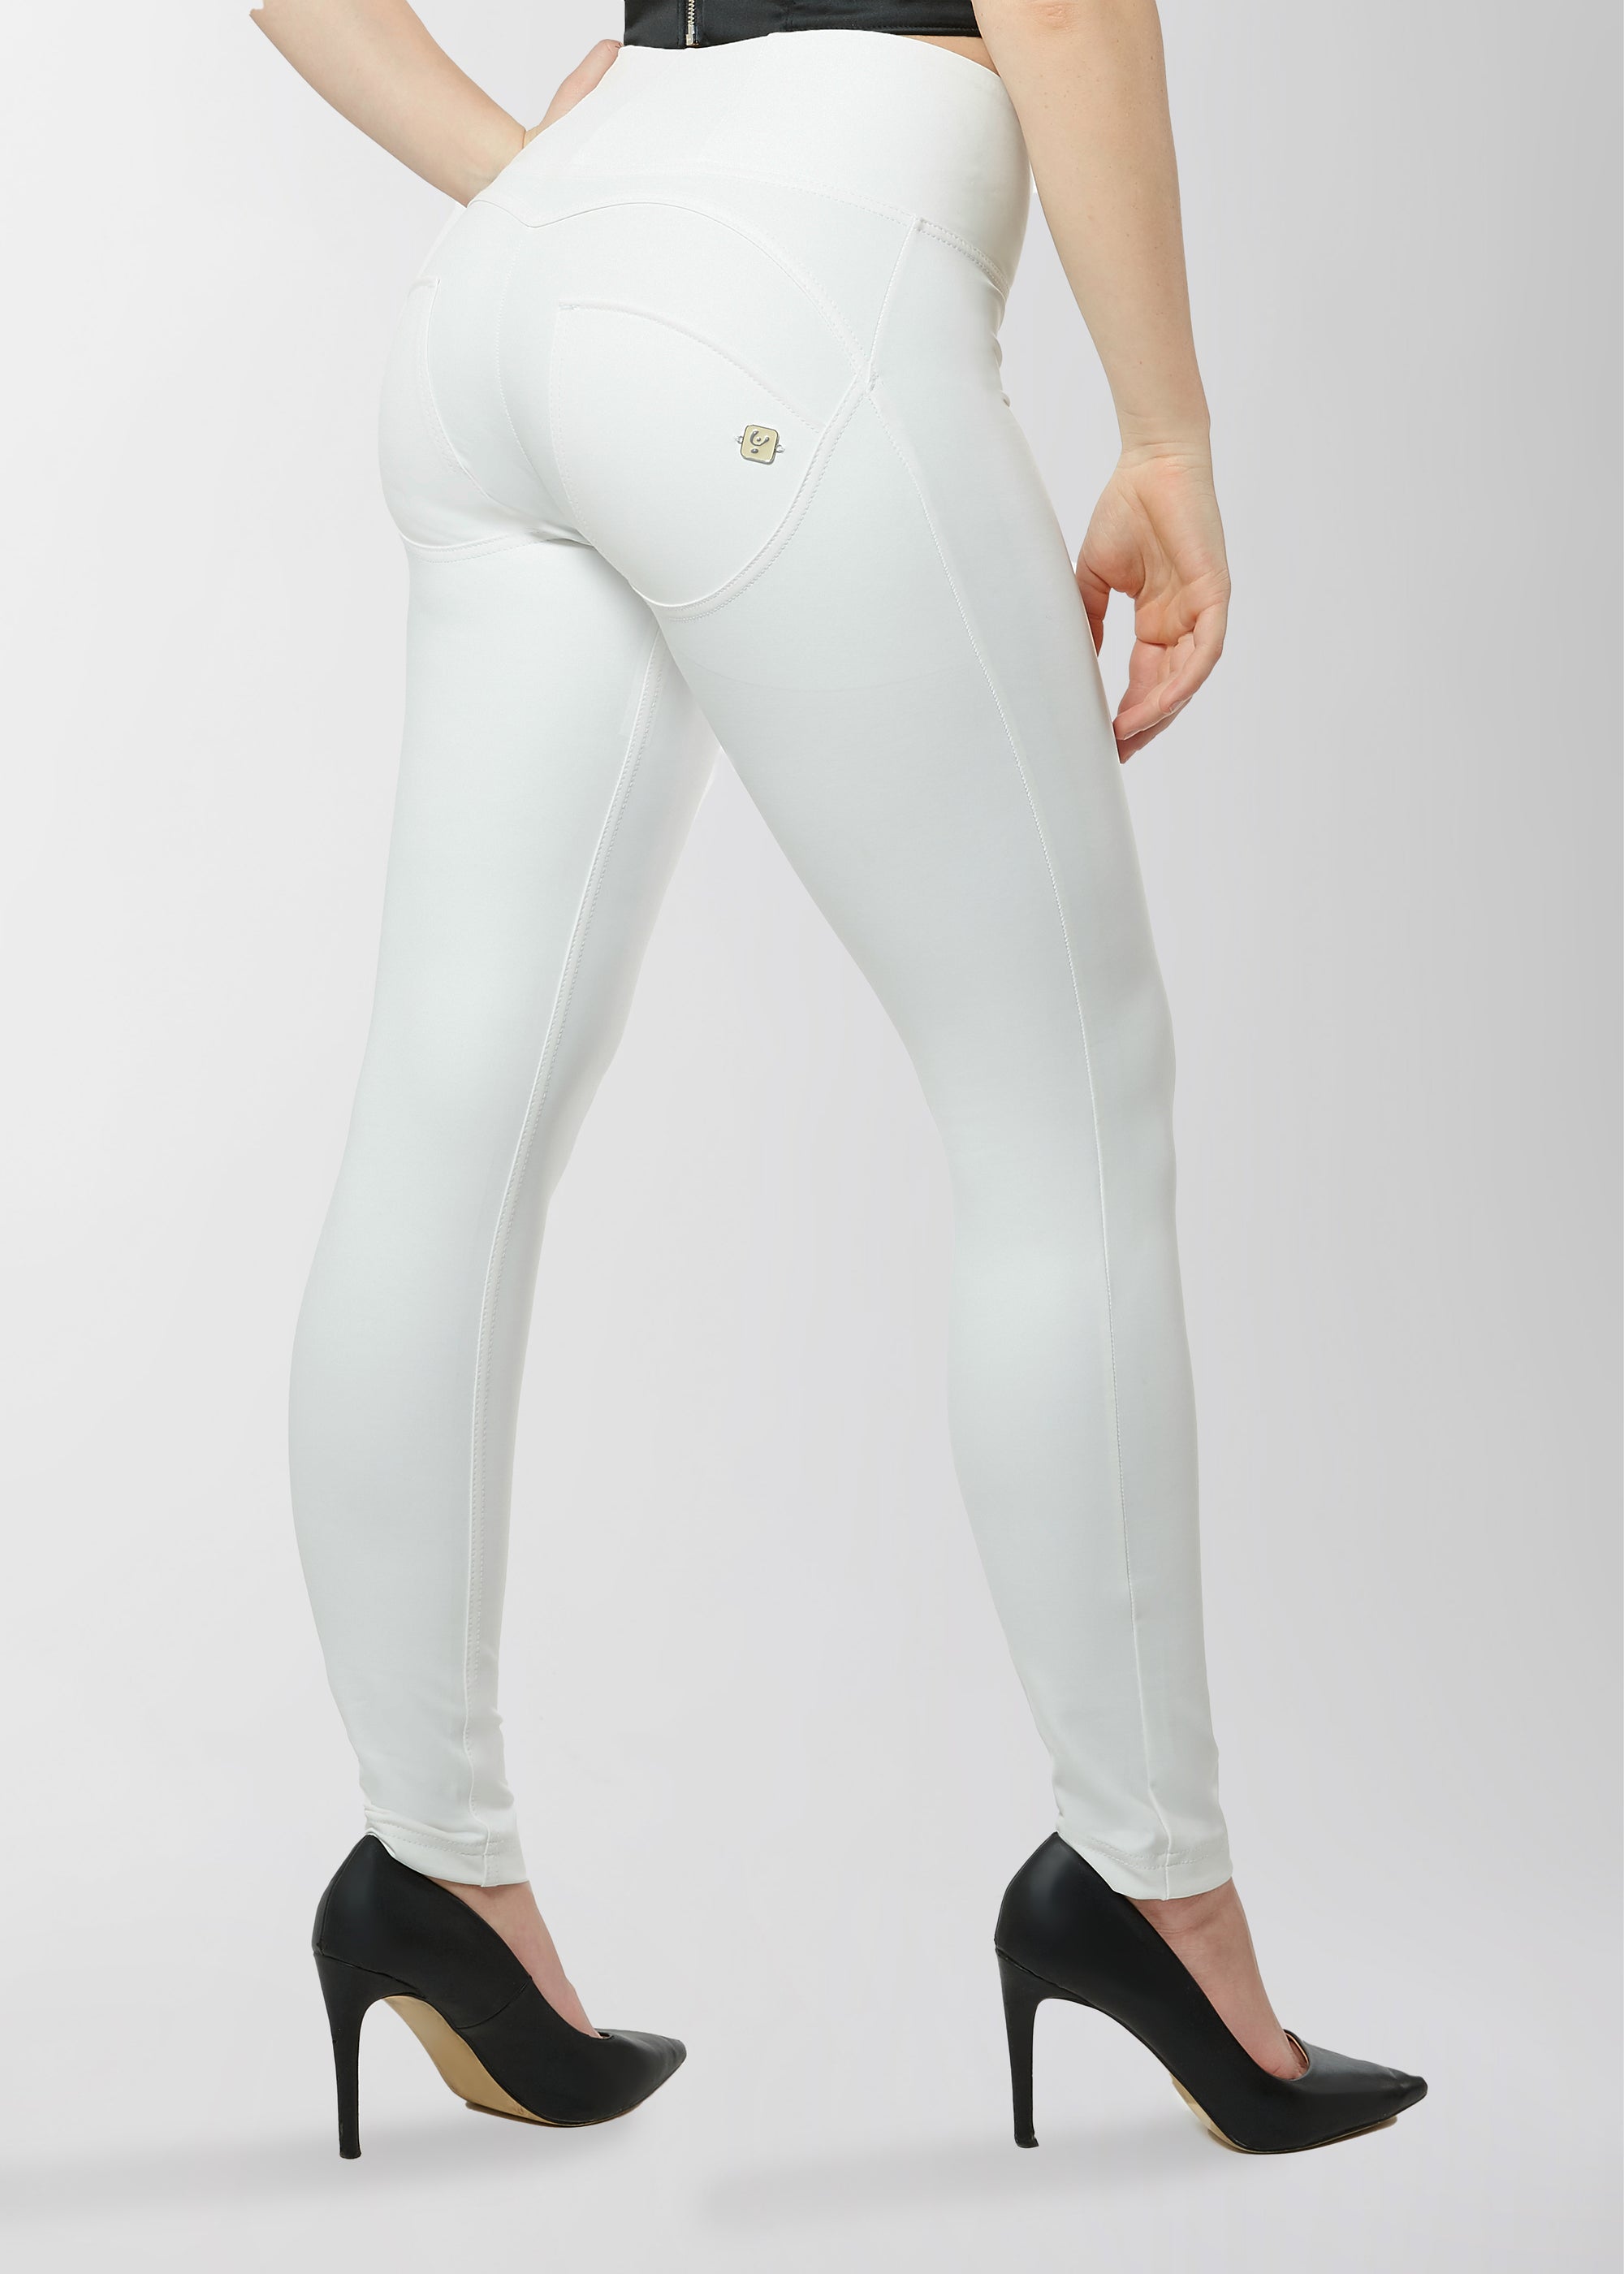 WR.UP® Faux Leather - High Rise Full Length - White